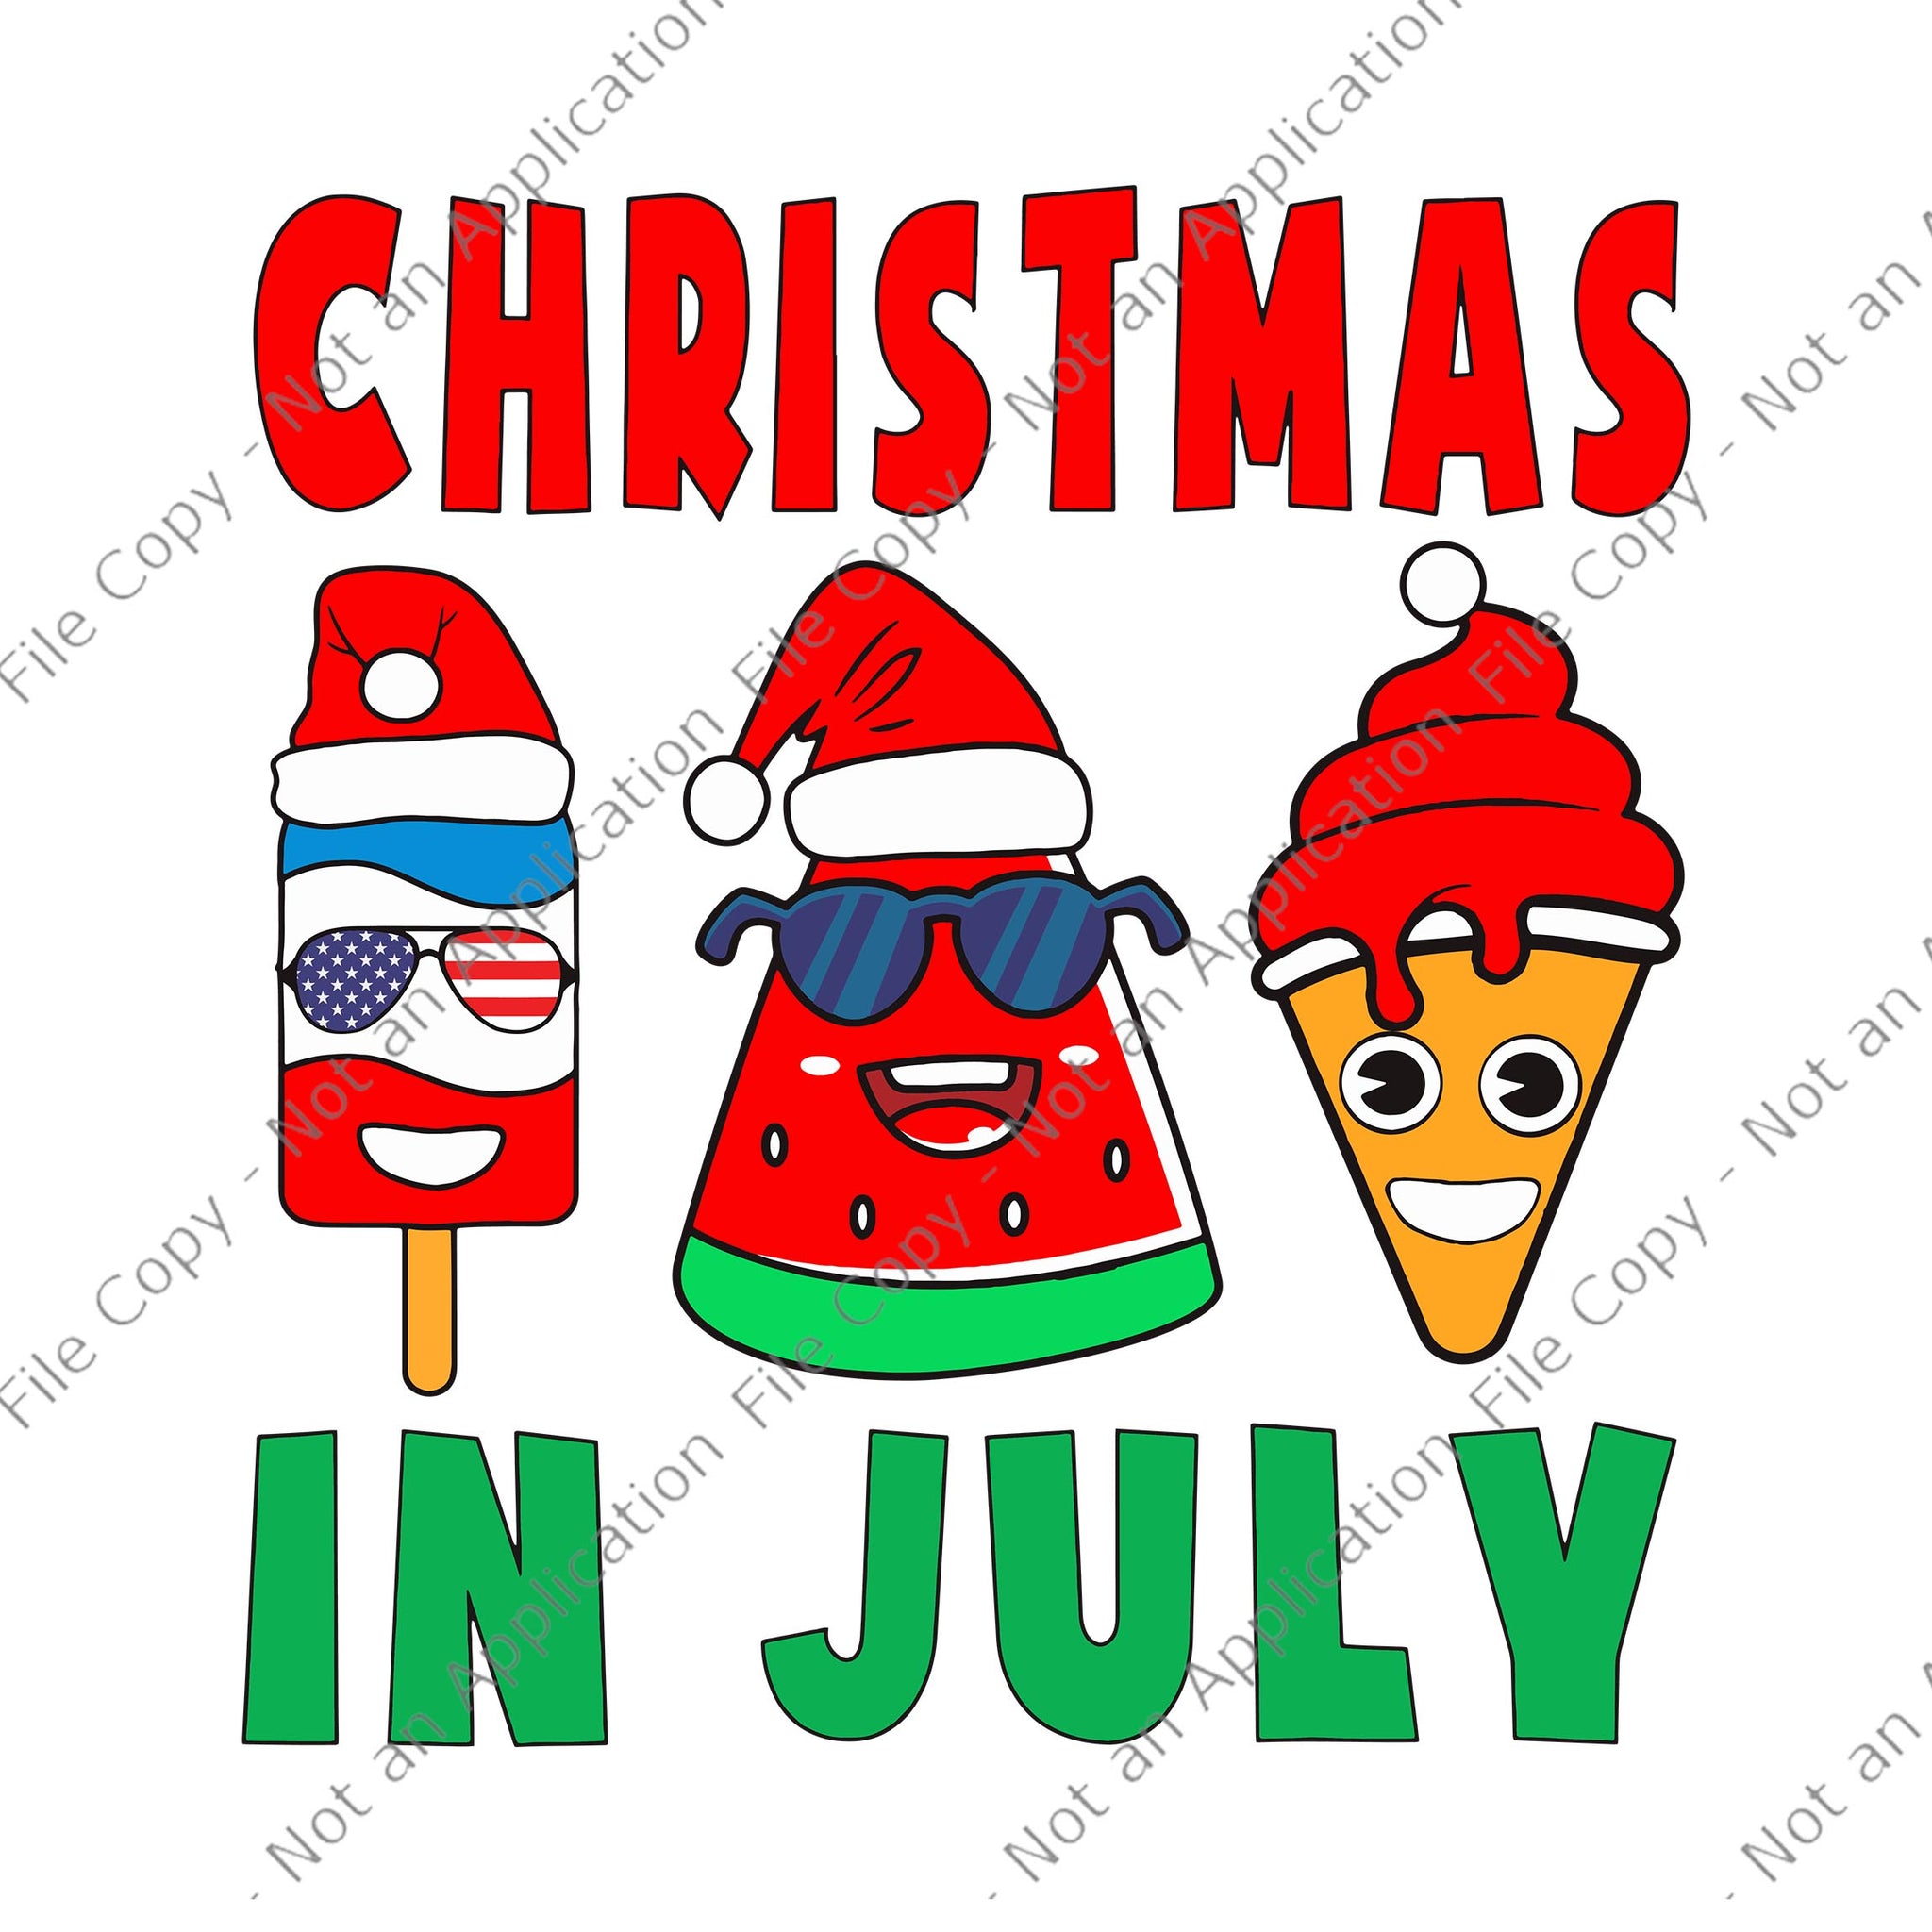 Christmas In July Svg, Christmas Watermelon, Christmas In July Watermelon Ice Pops Xmas Santa Hat, Christmas Svg, Santa Christmas